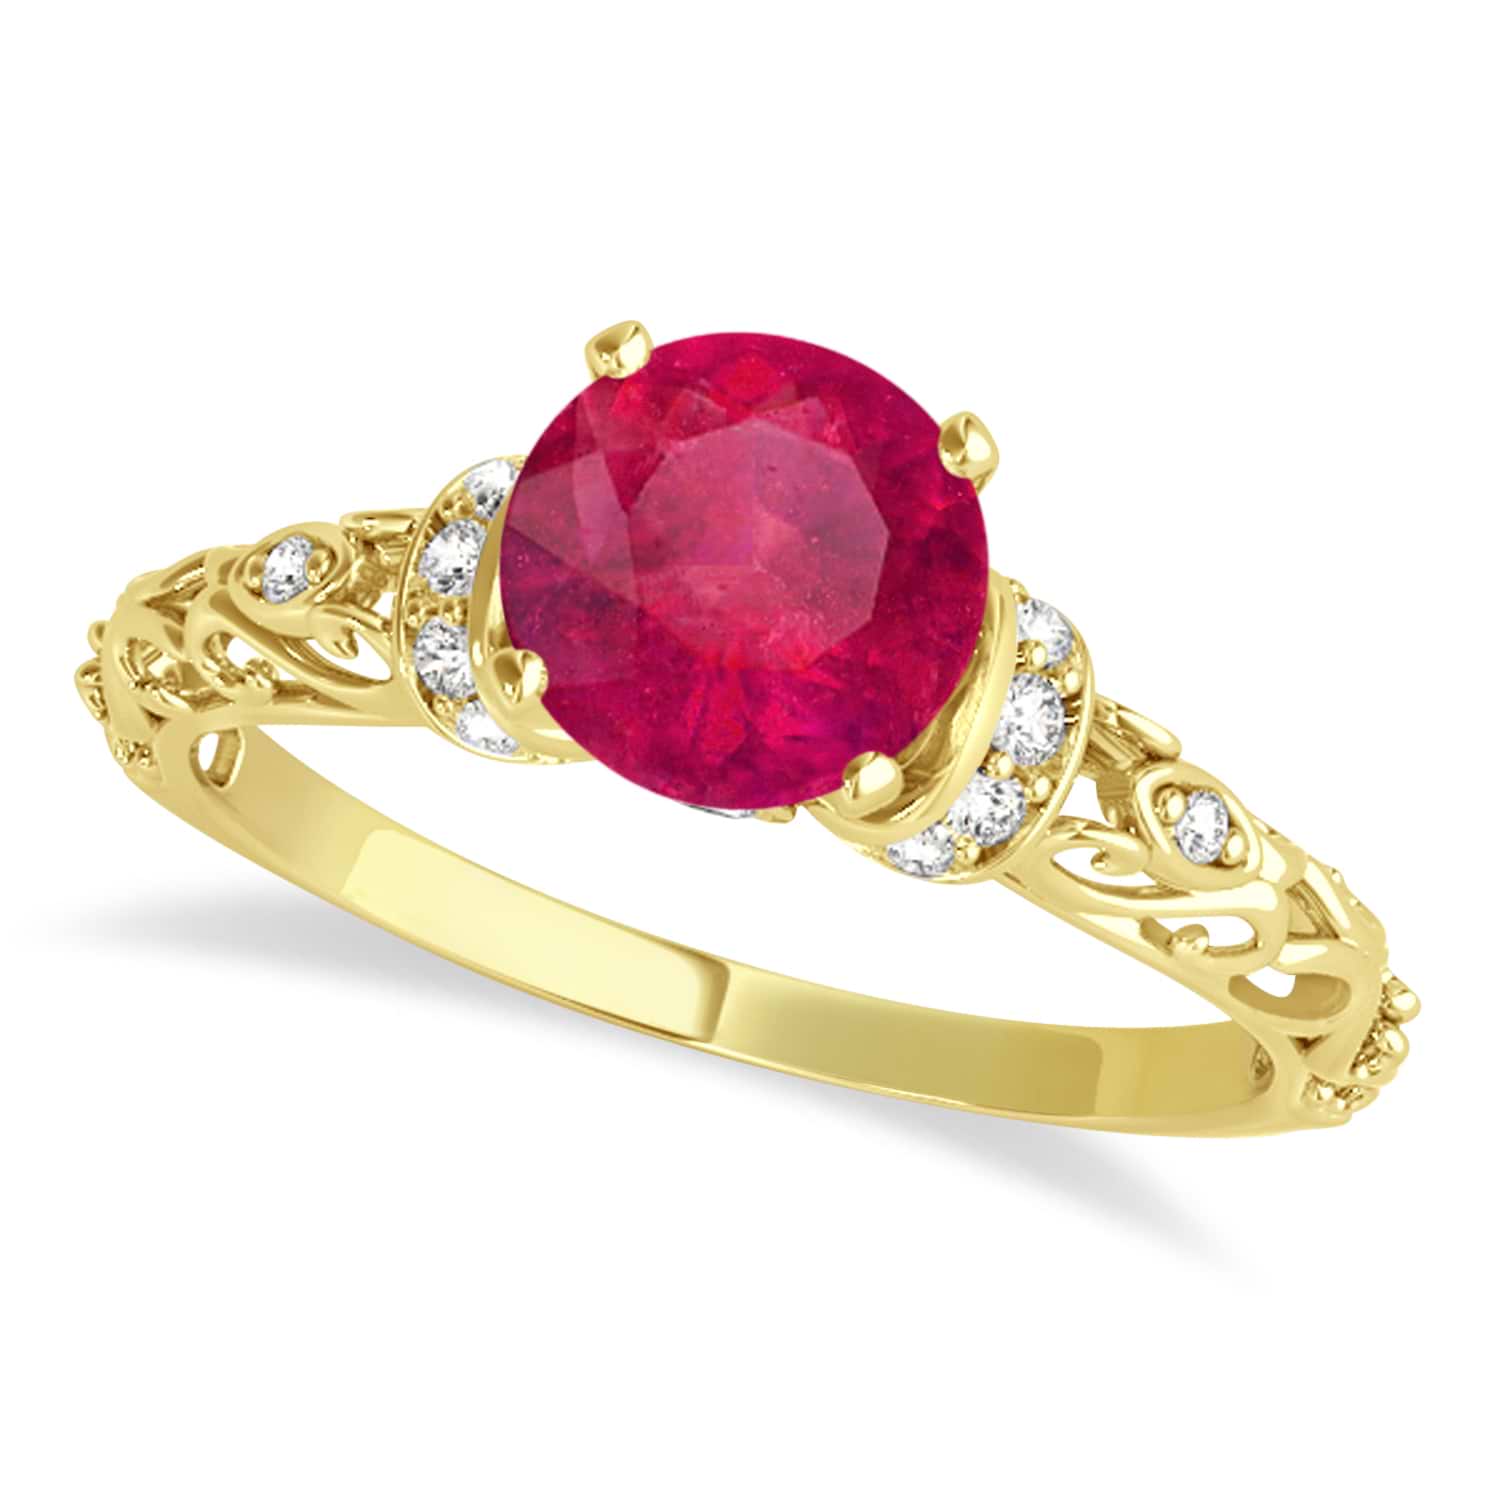 Ruby & Diamond Antique Style Engagement Ring 14k Yellow Gold (1.12ct)